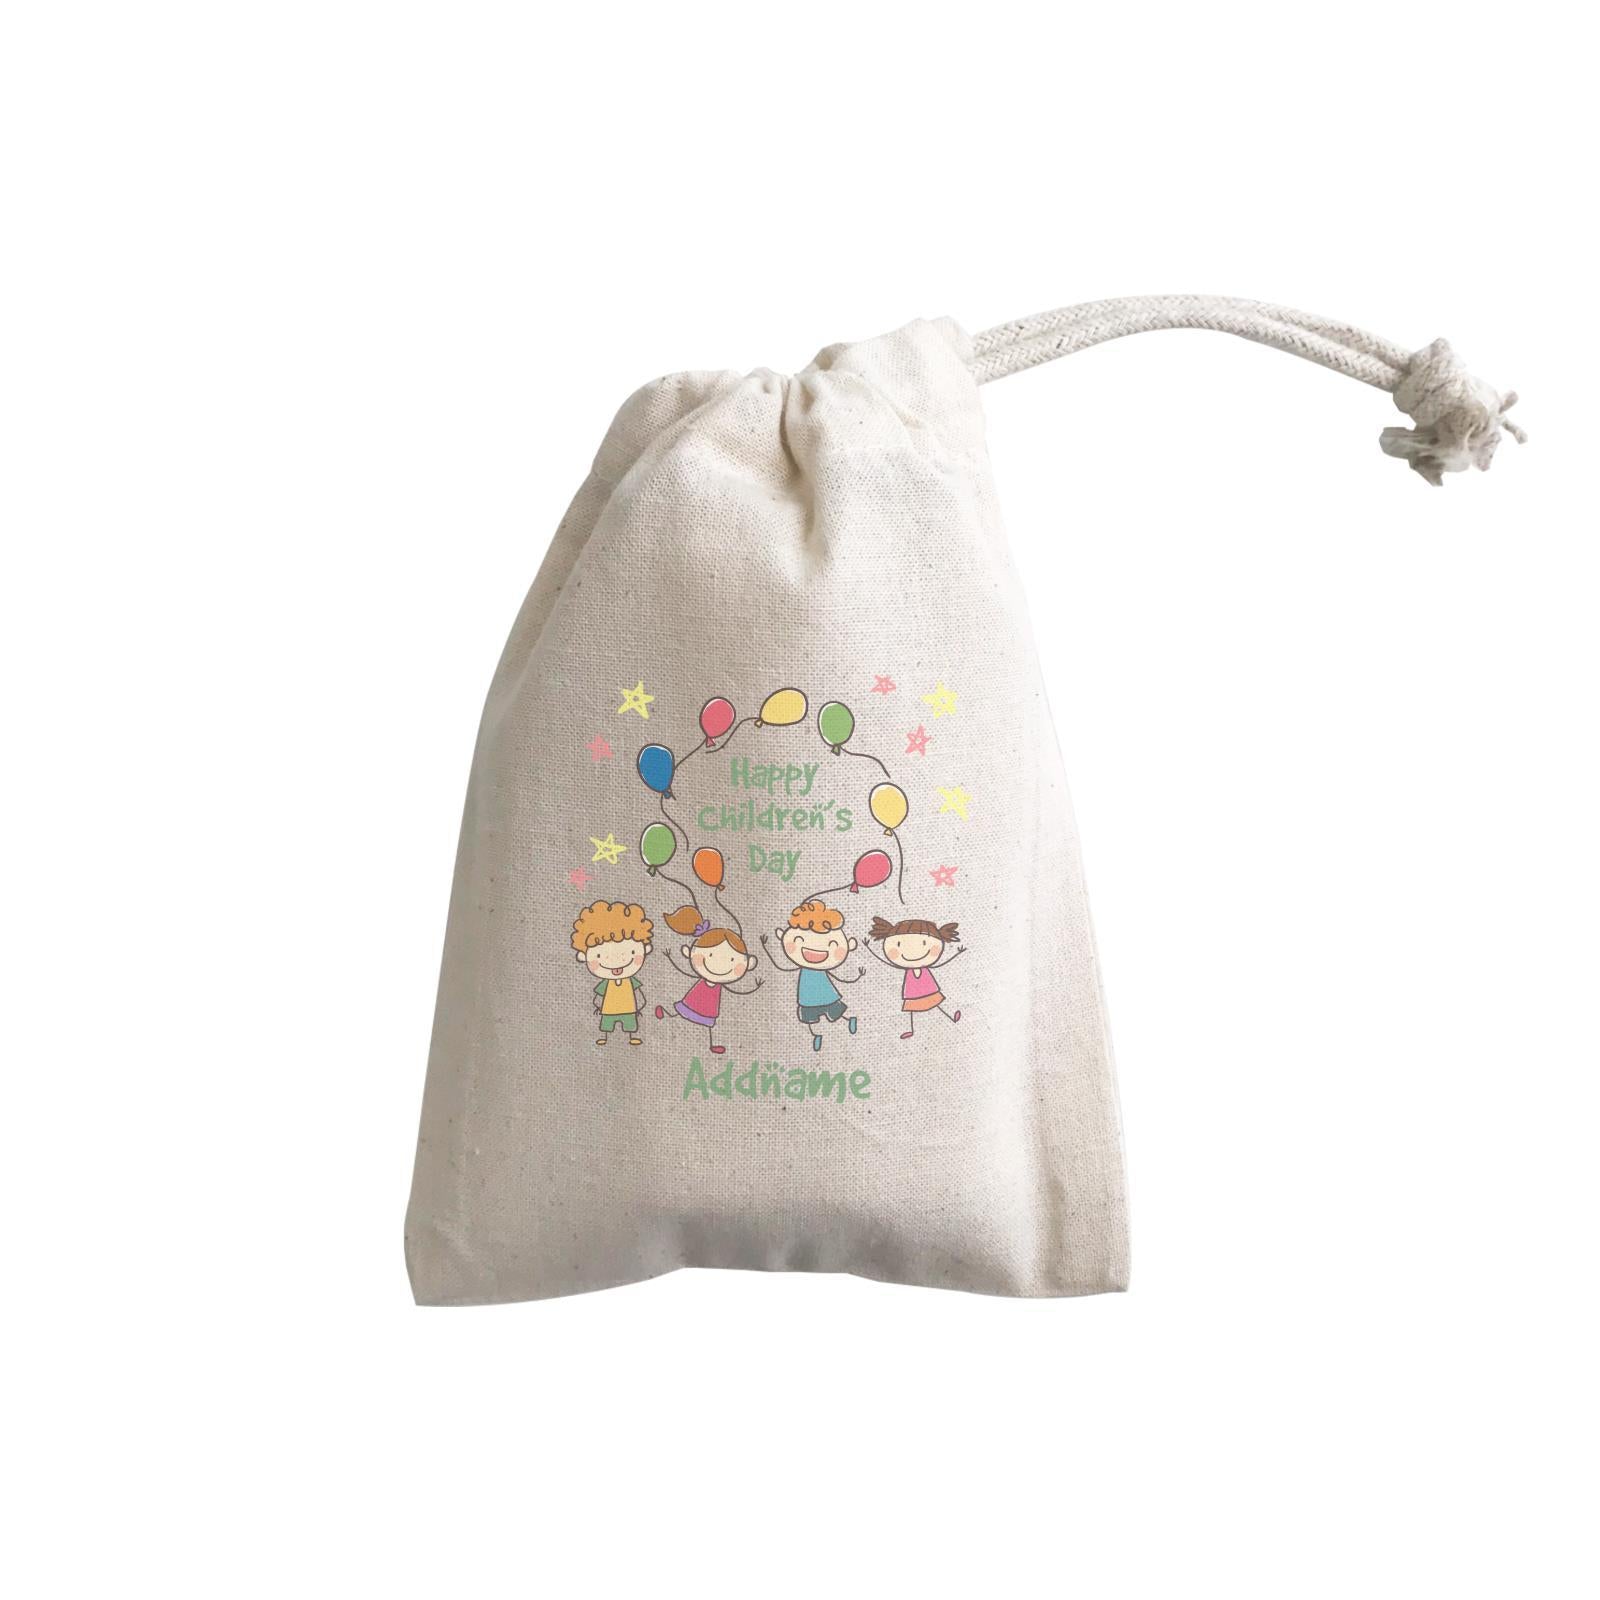 Children's Day Gift Series Four Cute Children With Balloons Addname  Gift Pouch